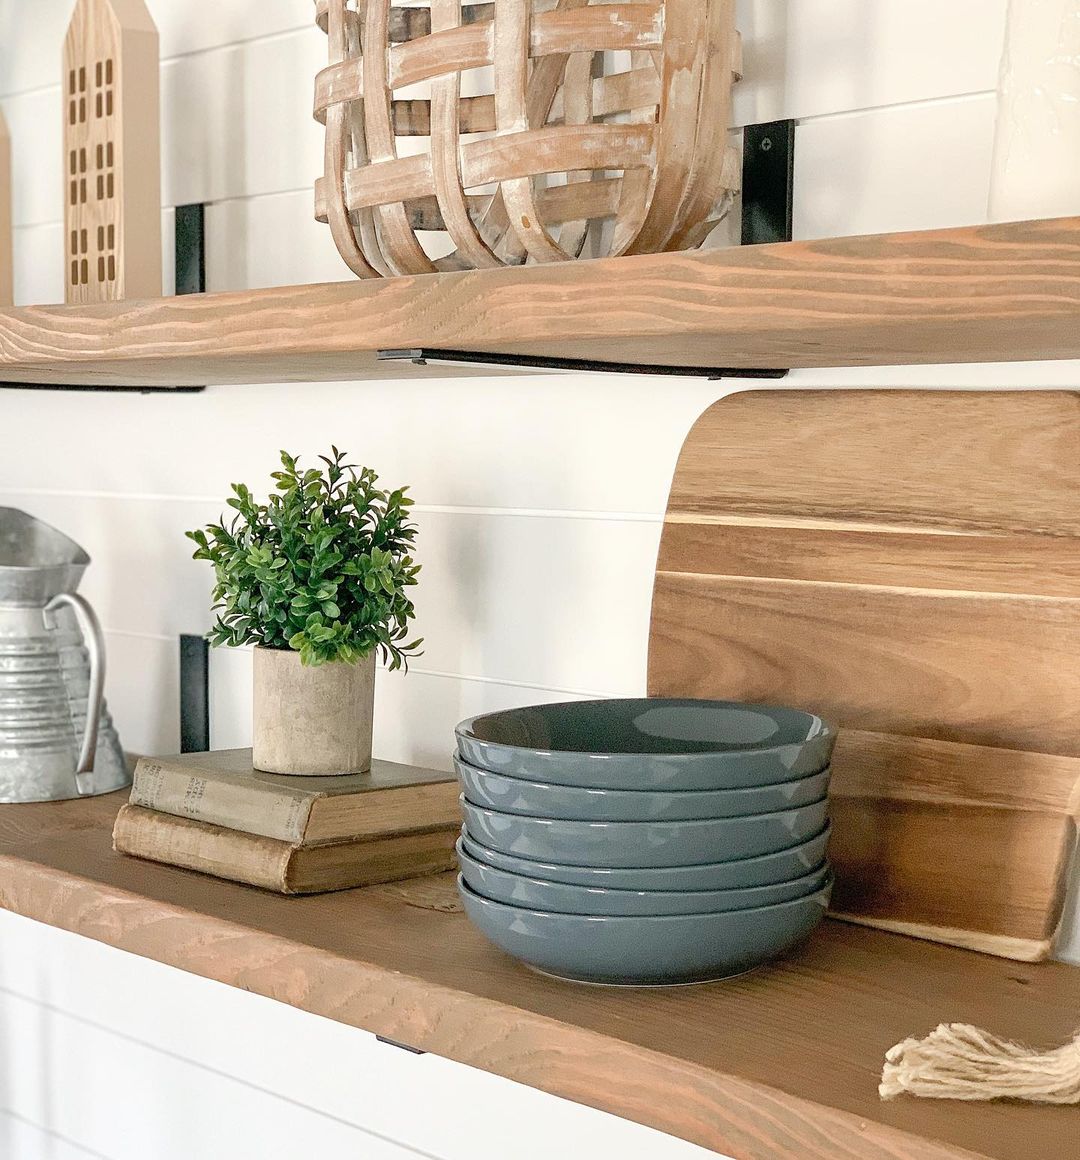 What Role Does Dinnerware Play in Home Décor?